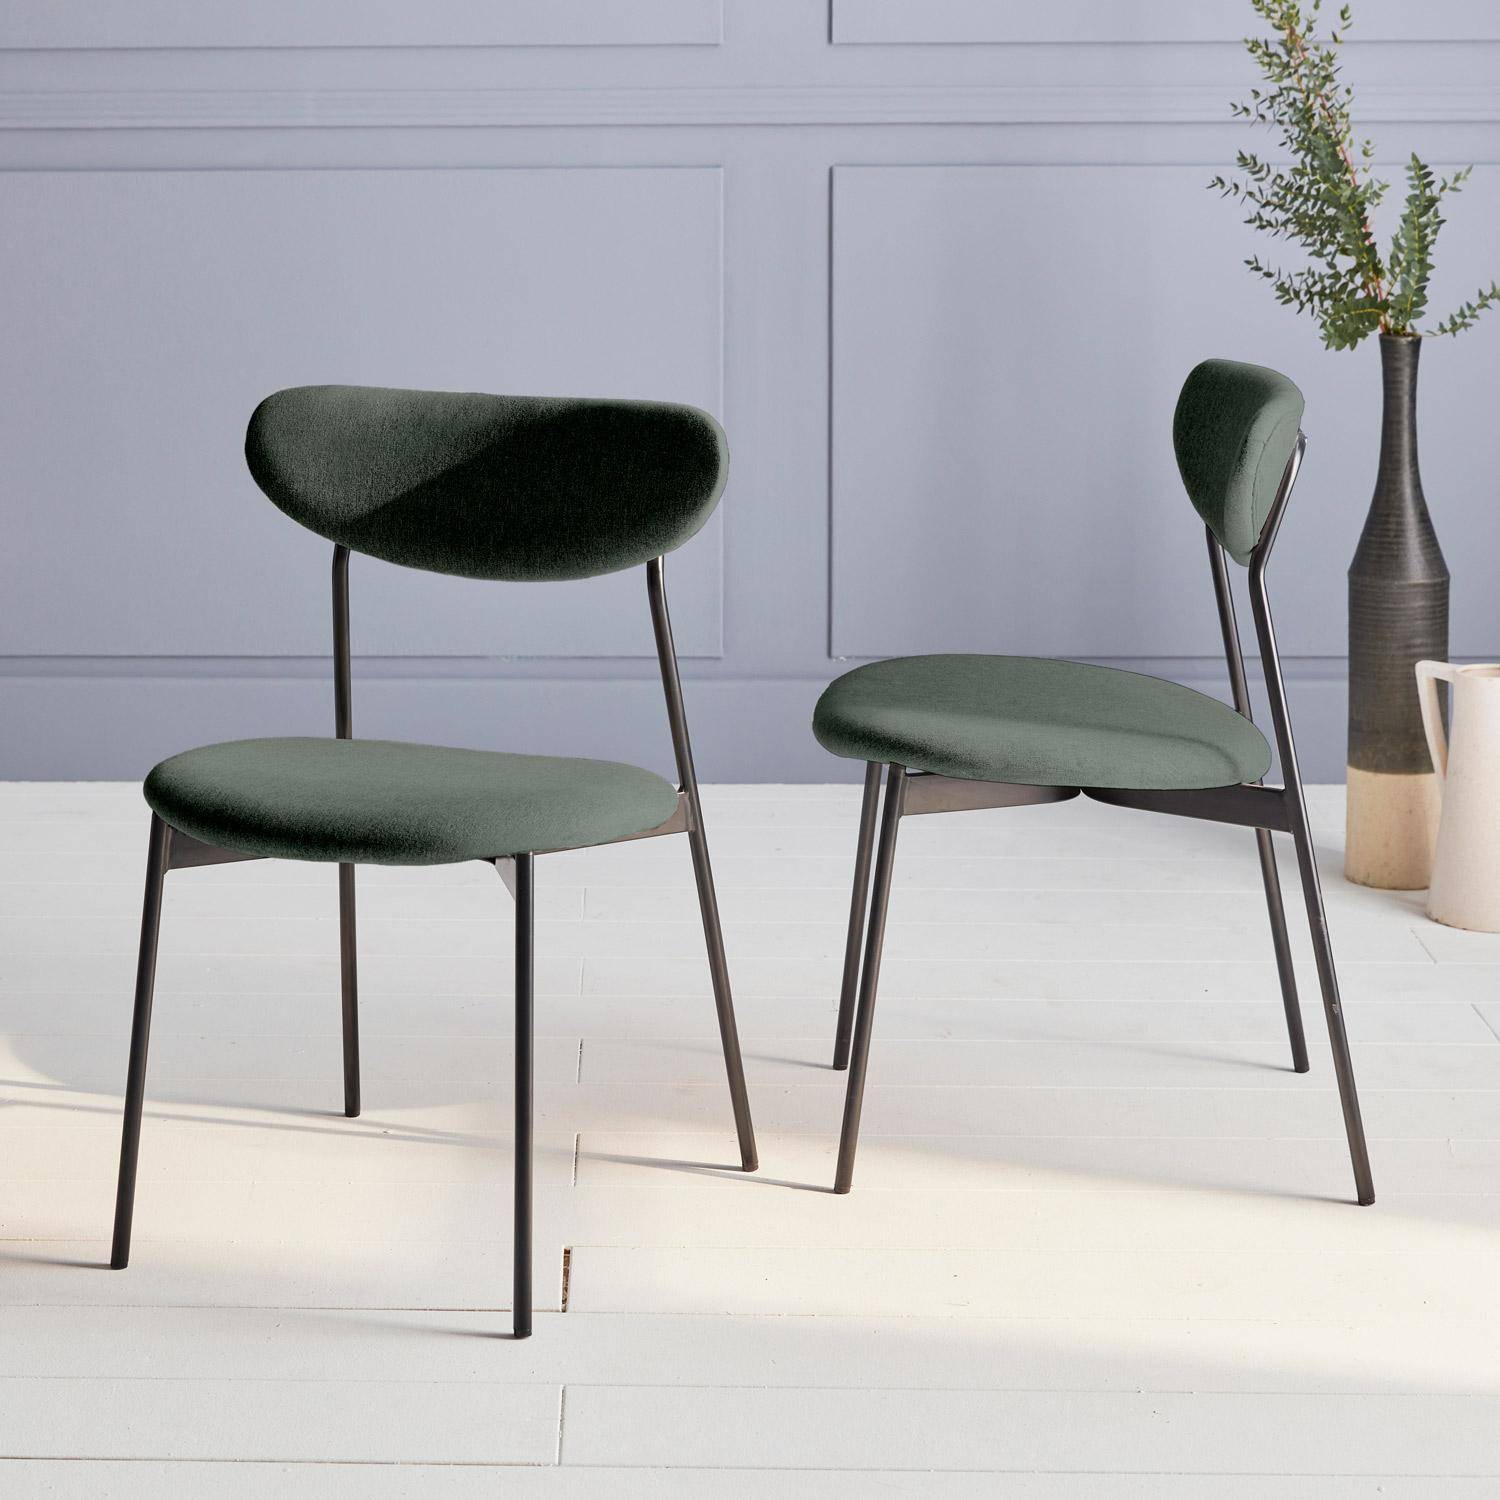 Set of 2 retro style dining chairs with steel legs - Arty - Green,sweeek,Photo2